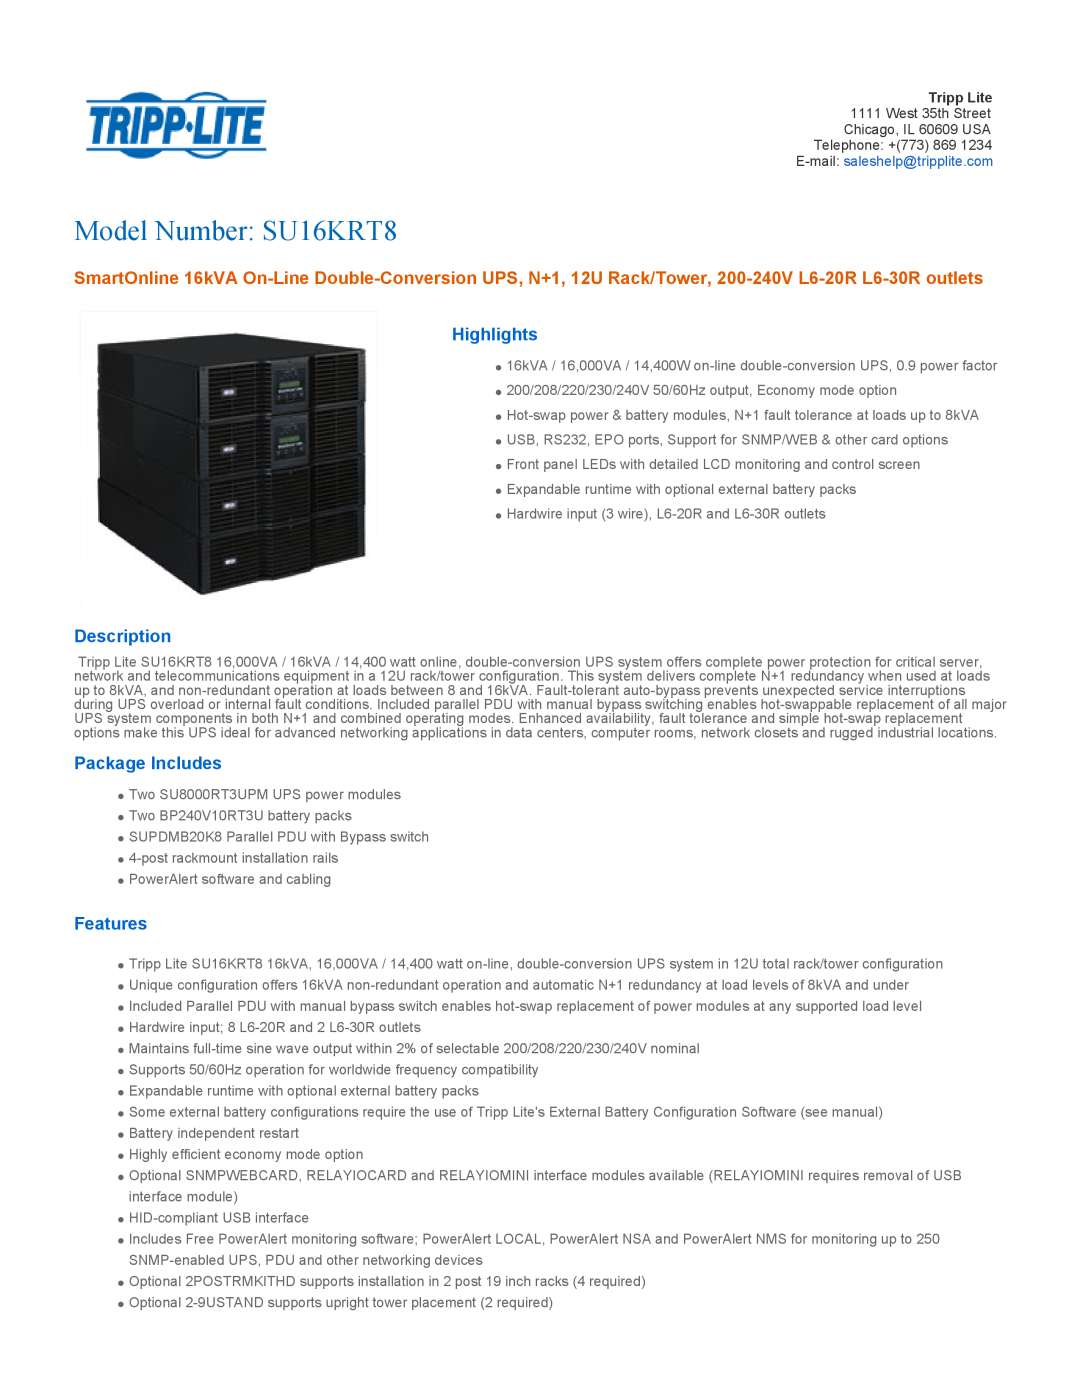 Tripp Lite manual Highlights, Description, Package Includes, Features, Model Number SU16KRT8 